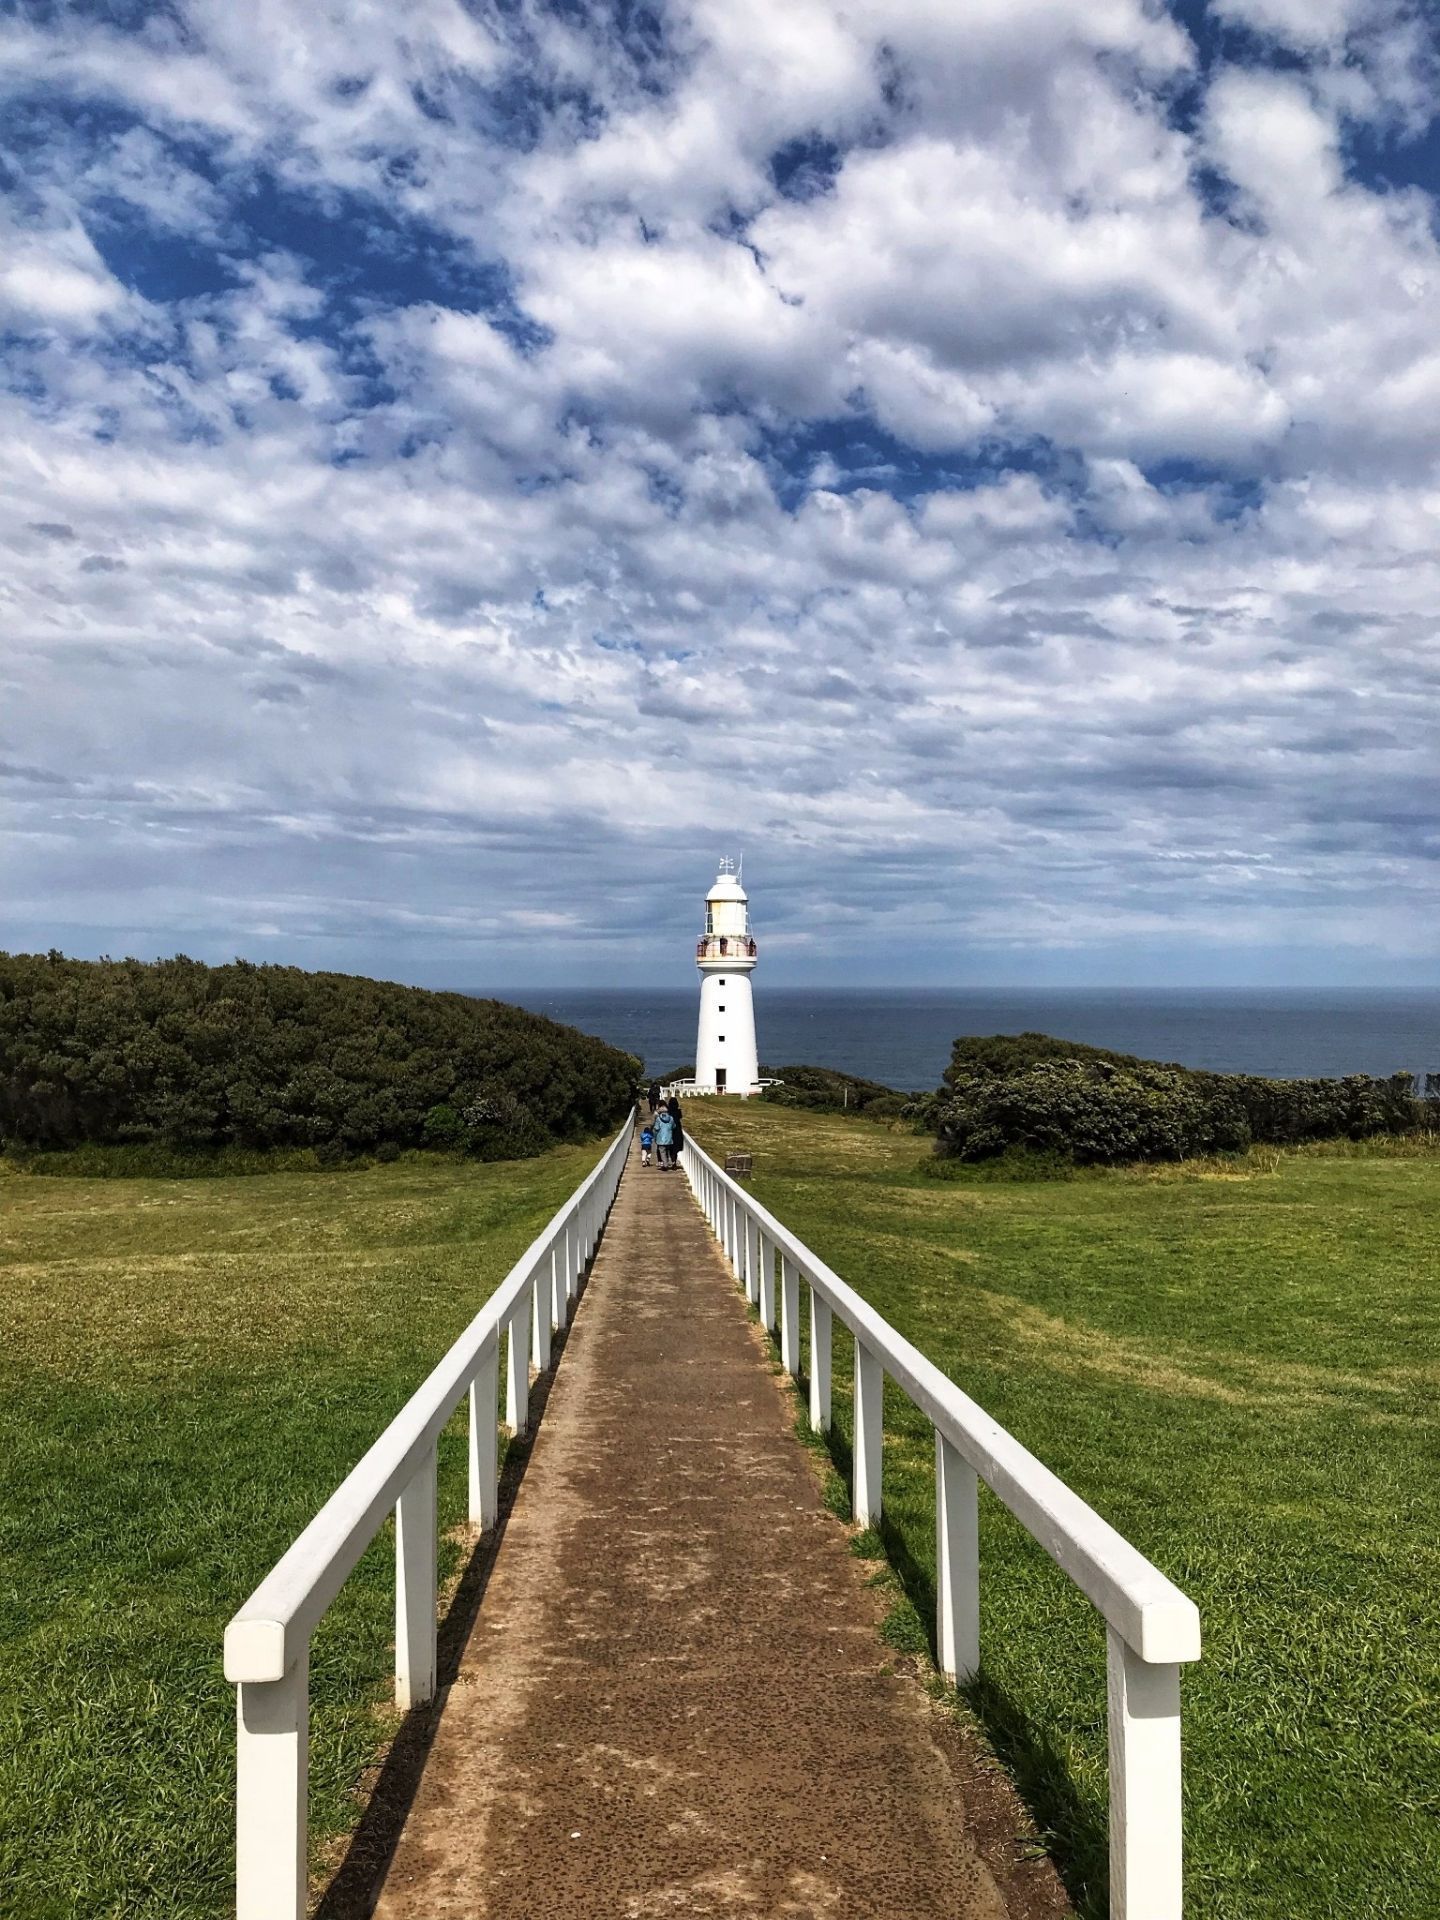 Cape Otway Lightstation attraction reviews - Cape Otway Lightstation  tickets - Cape Otway Lightstation discounts - Cape Otway Lightstation  transportation, address, opening hours - attractions, hotels, and food near Cape  Otway Lightstation - Trip.com